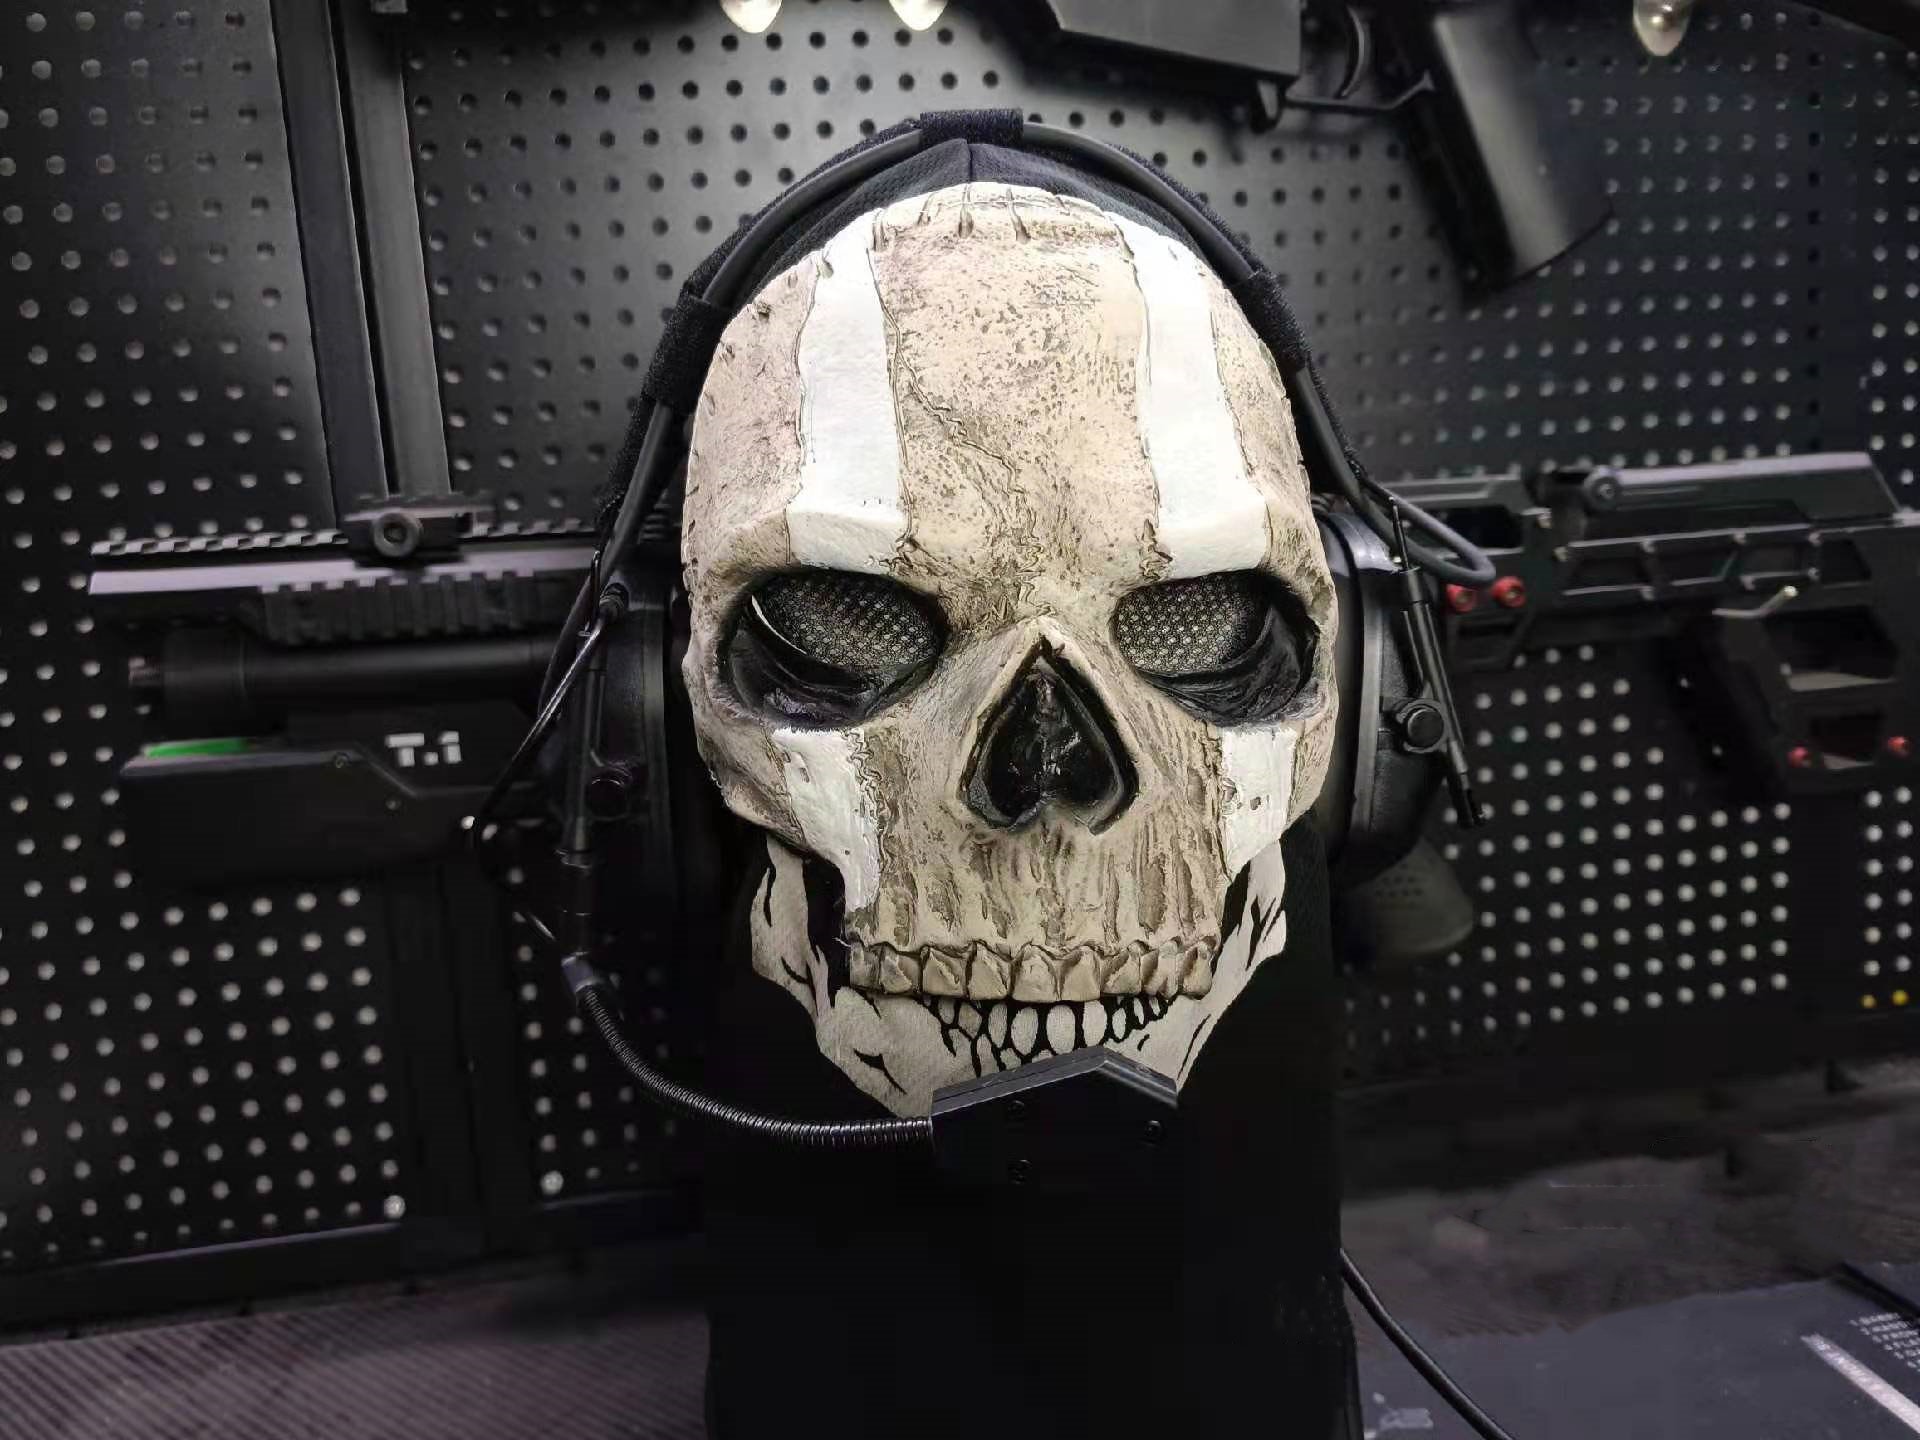 Ghost mask - Operator MW2 airsoft or cosplay - Inspire Uplift